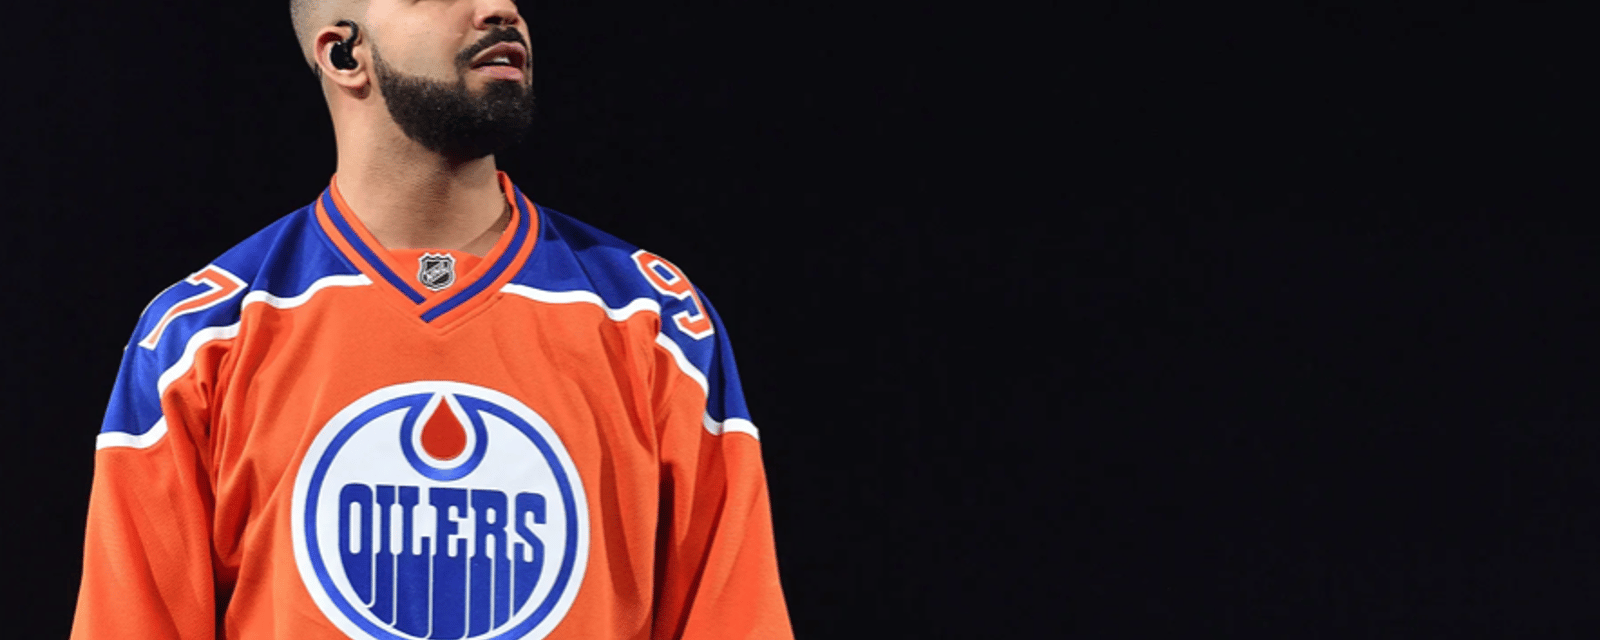 Rapper Drake drops massive bet on Oilers to win Stanley Cup 